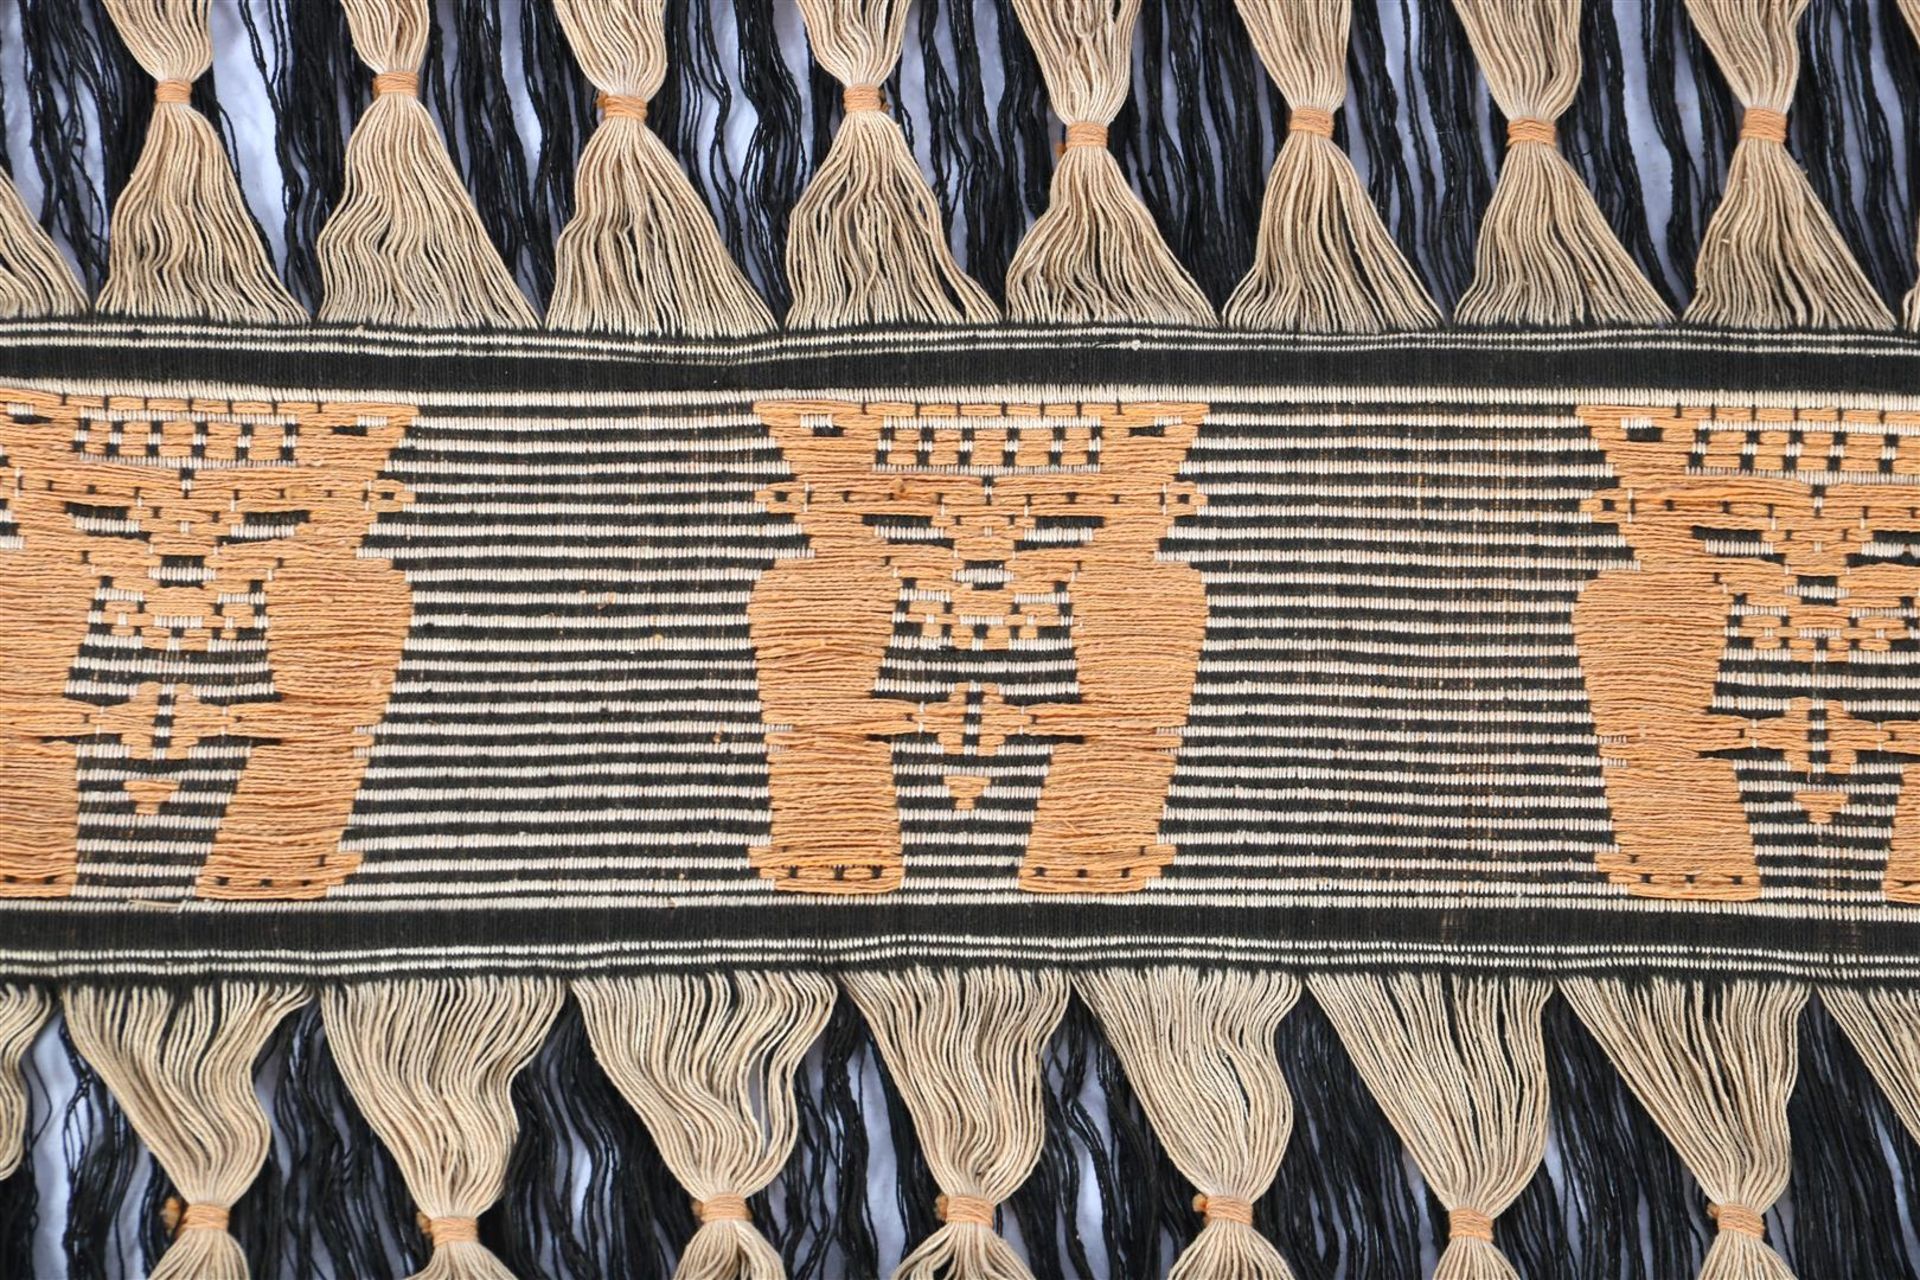 Woven textile wall decoration - Image 2 of 3